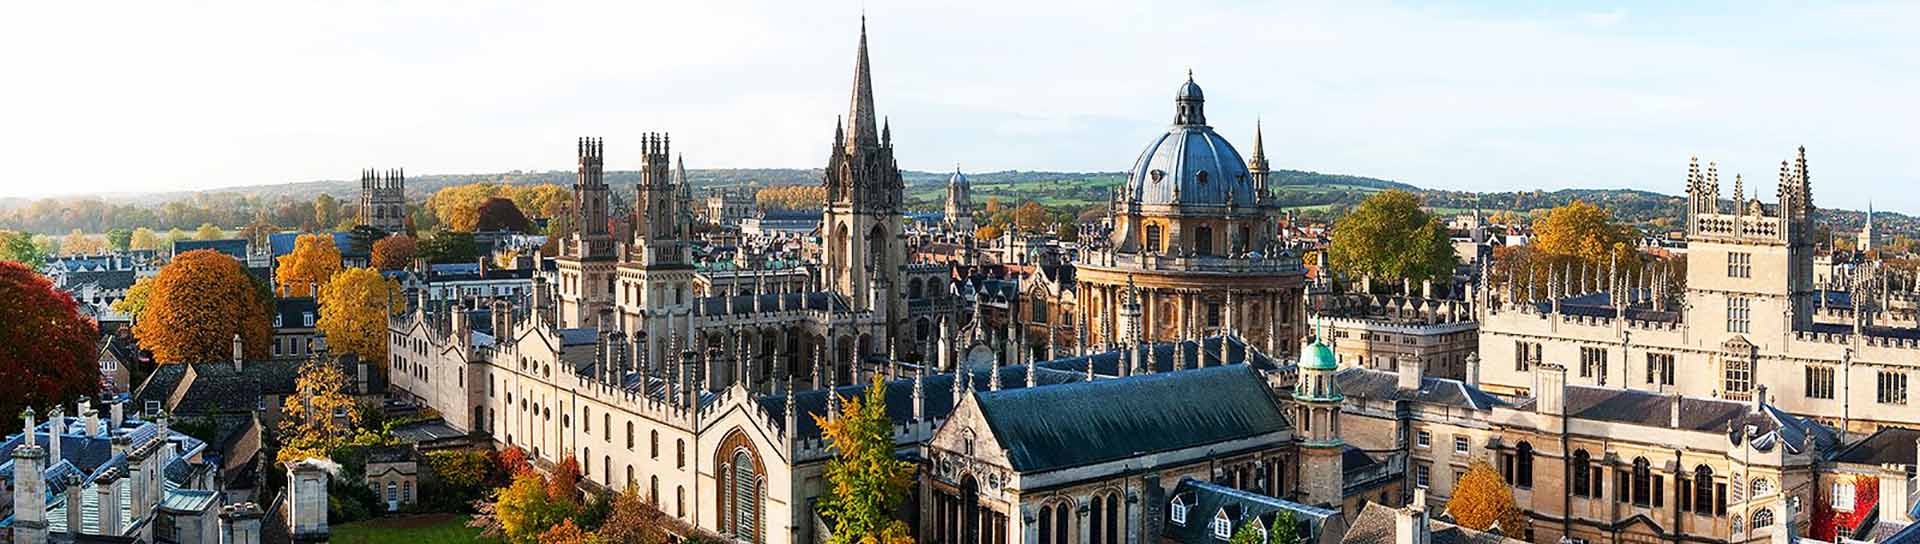 Oxford aerial view